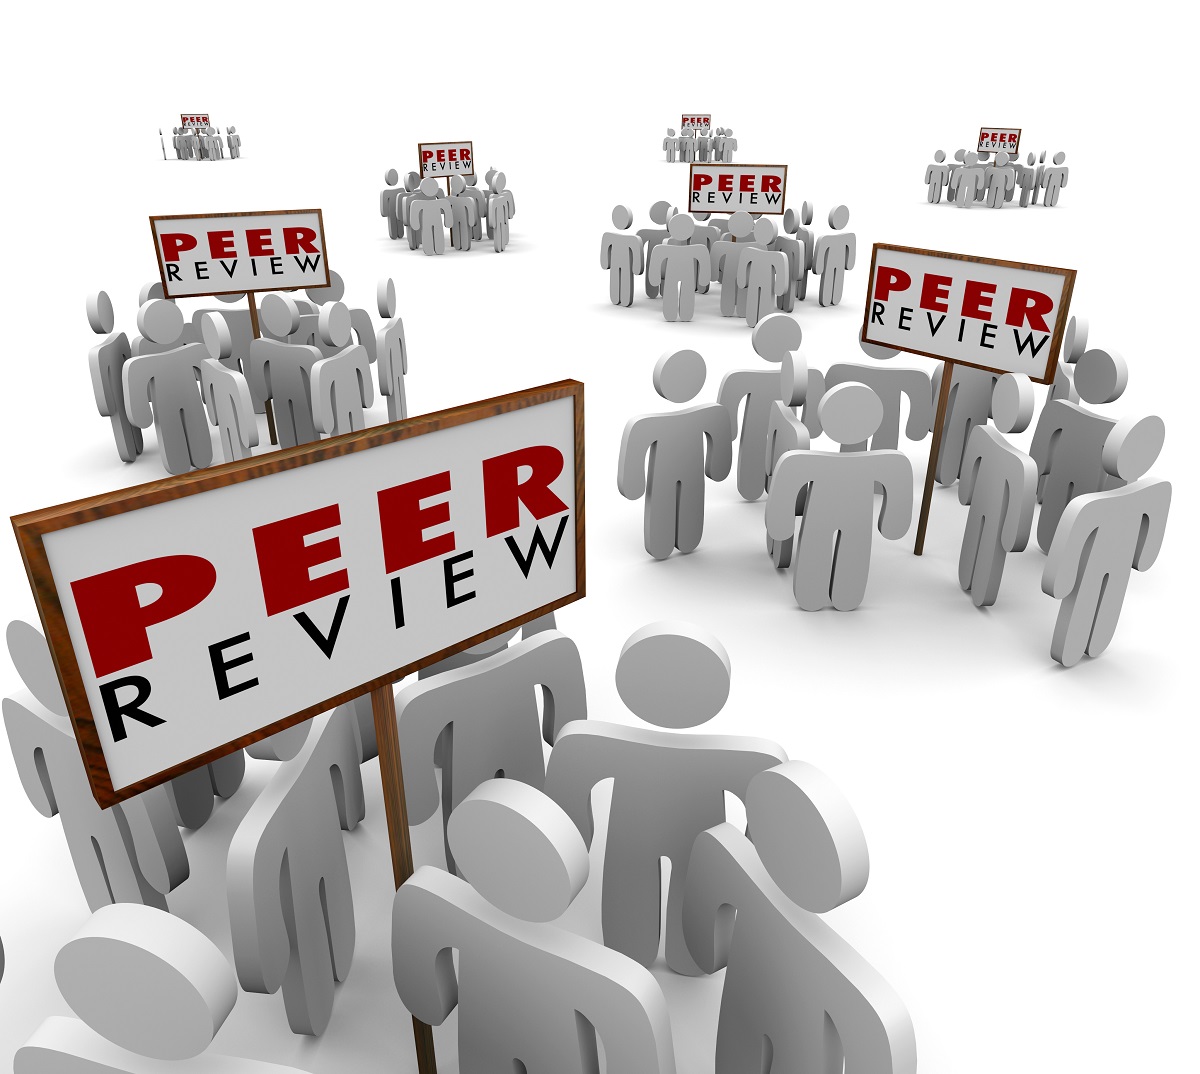 What You Should Not Do While Writing a Peer Review